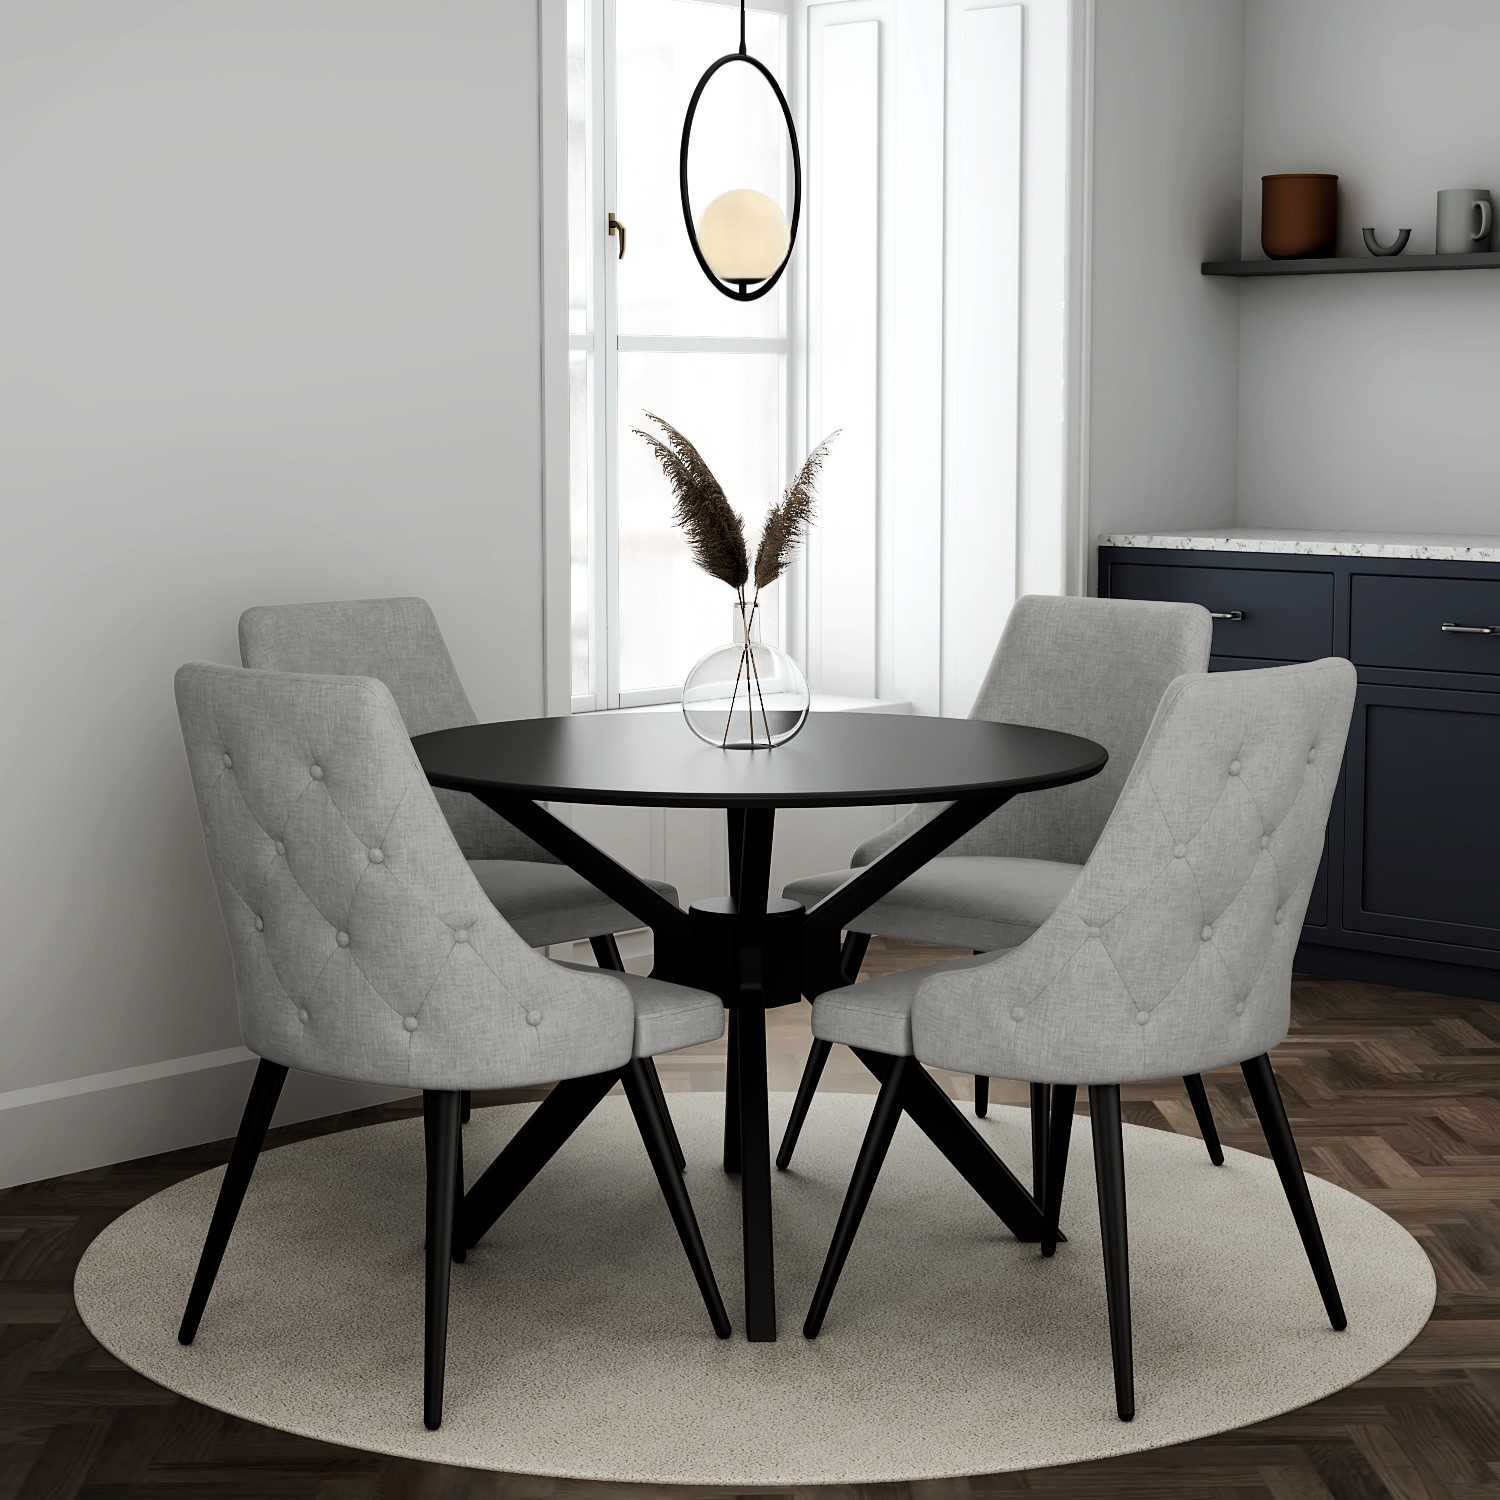 Black Round Dining Table With 4 Grey, Round Dining Table And 4 Chairs Uk